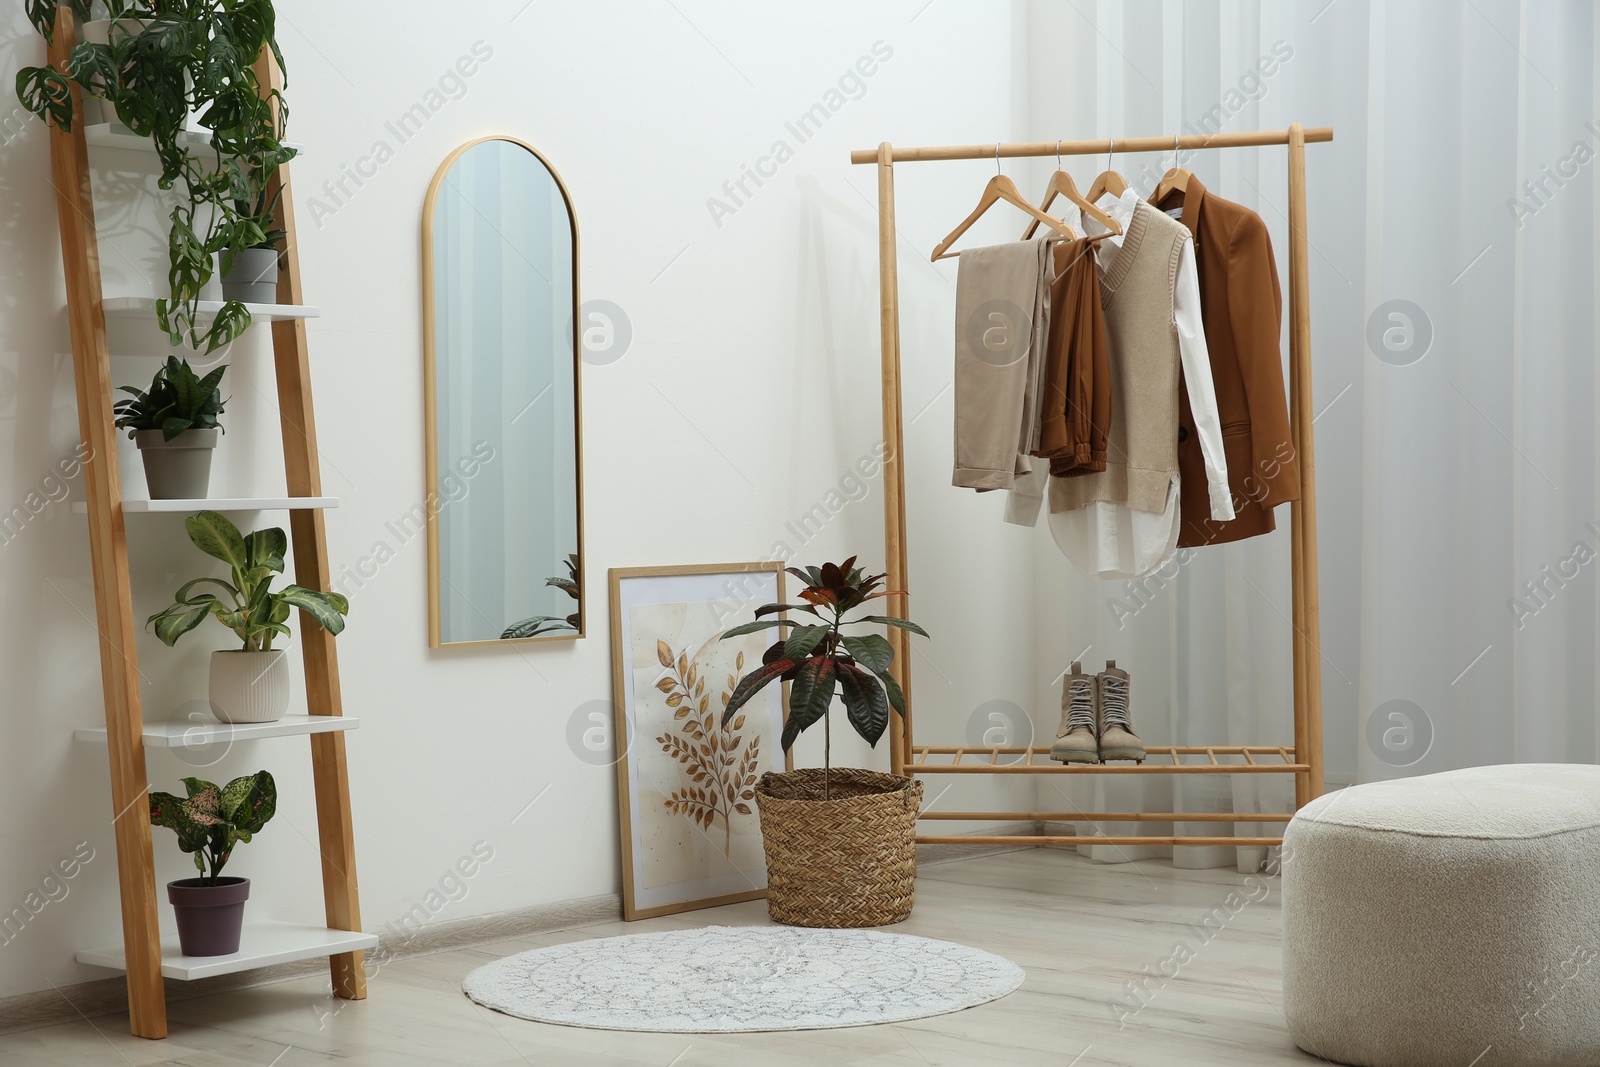 Photo of Dressing room interior with wooden furniture, mirror and houseplants. Stylish accessories